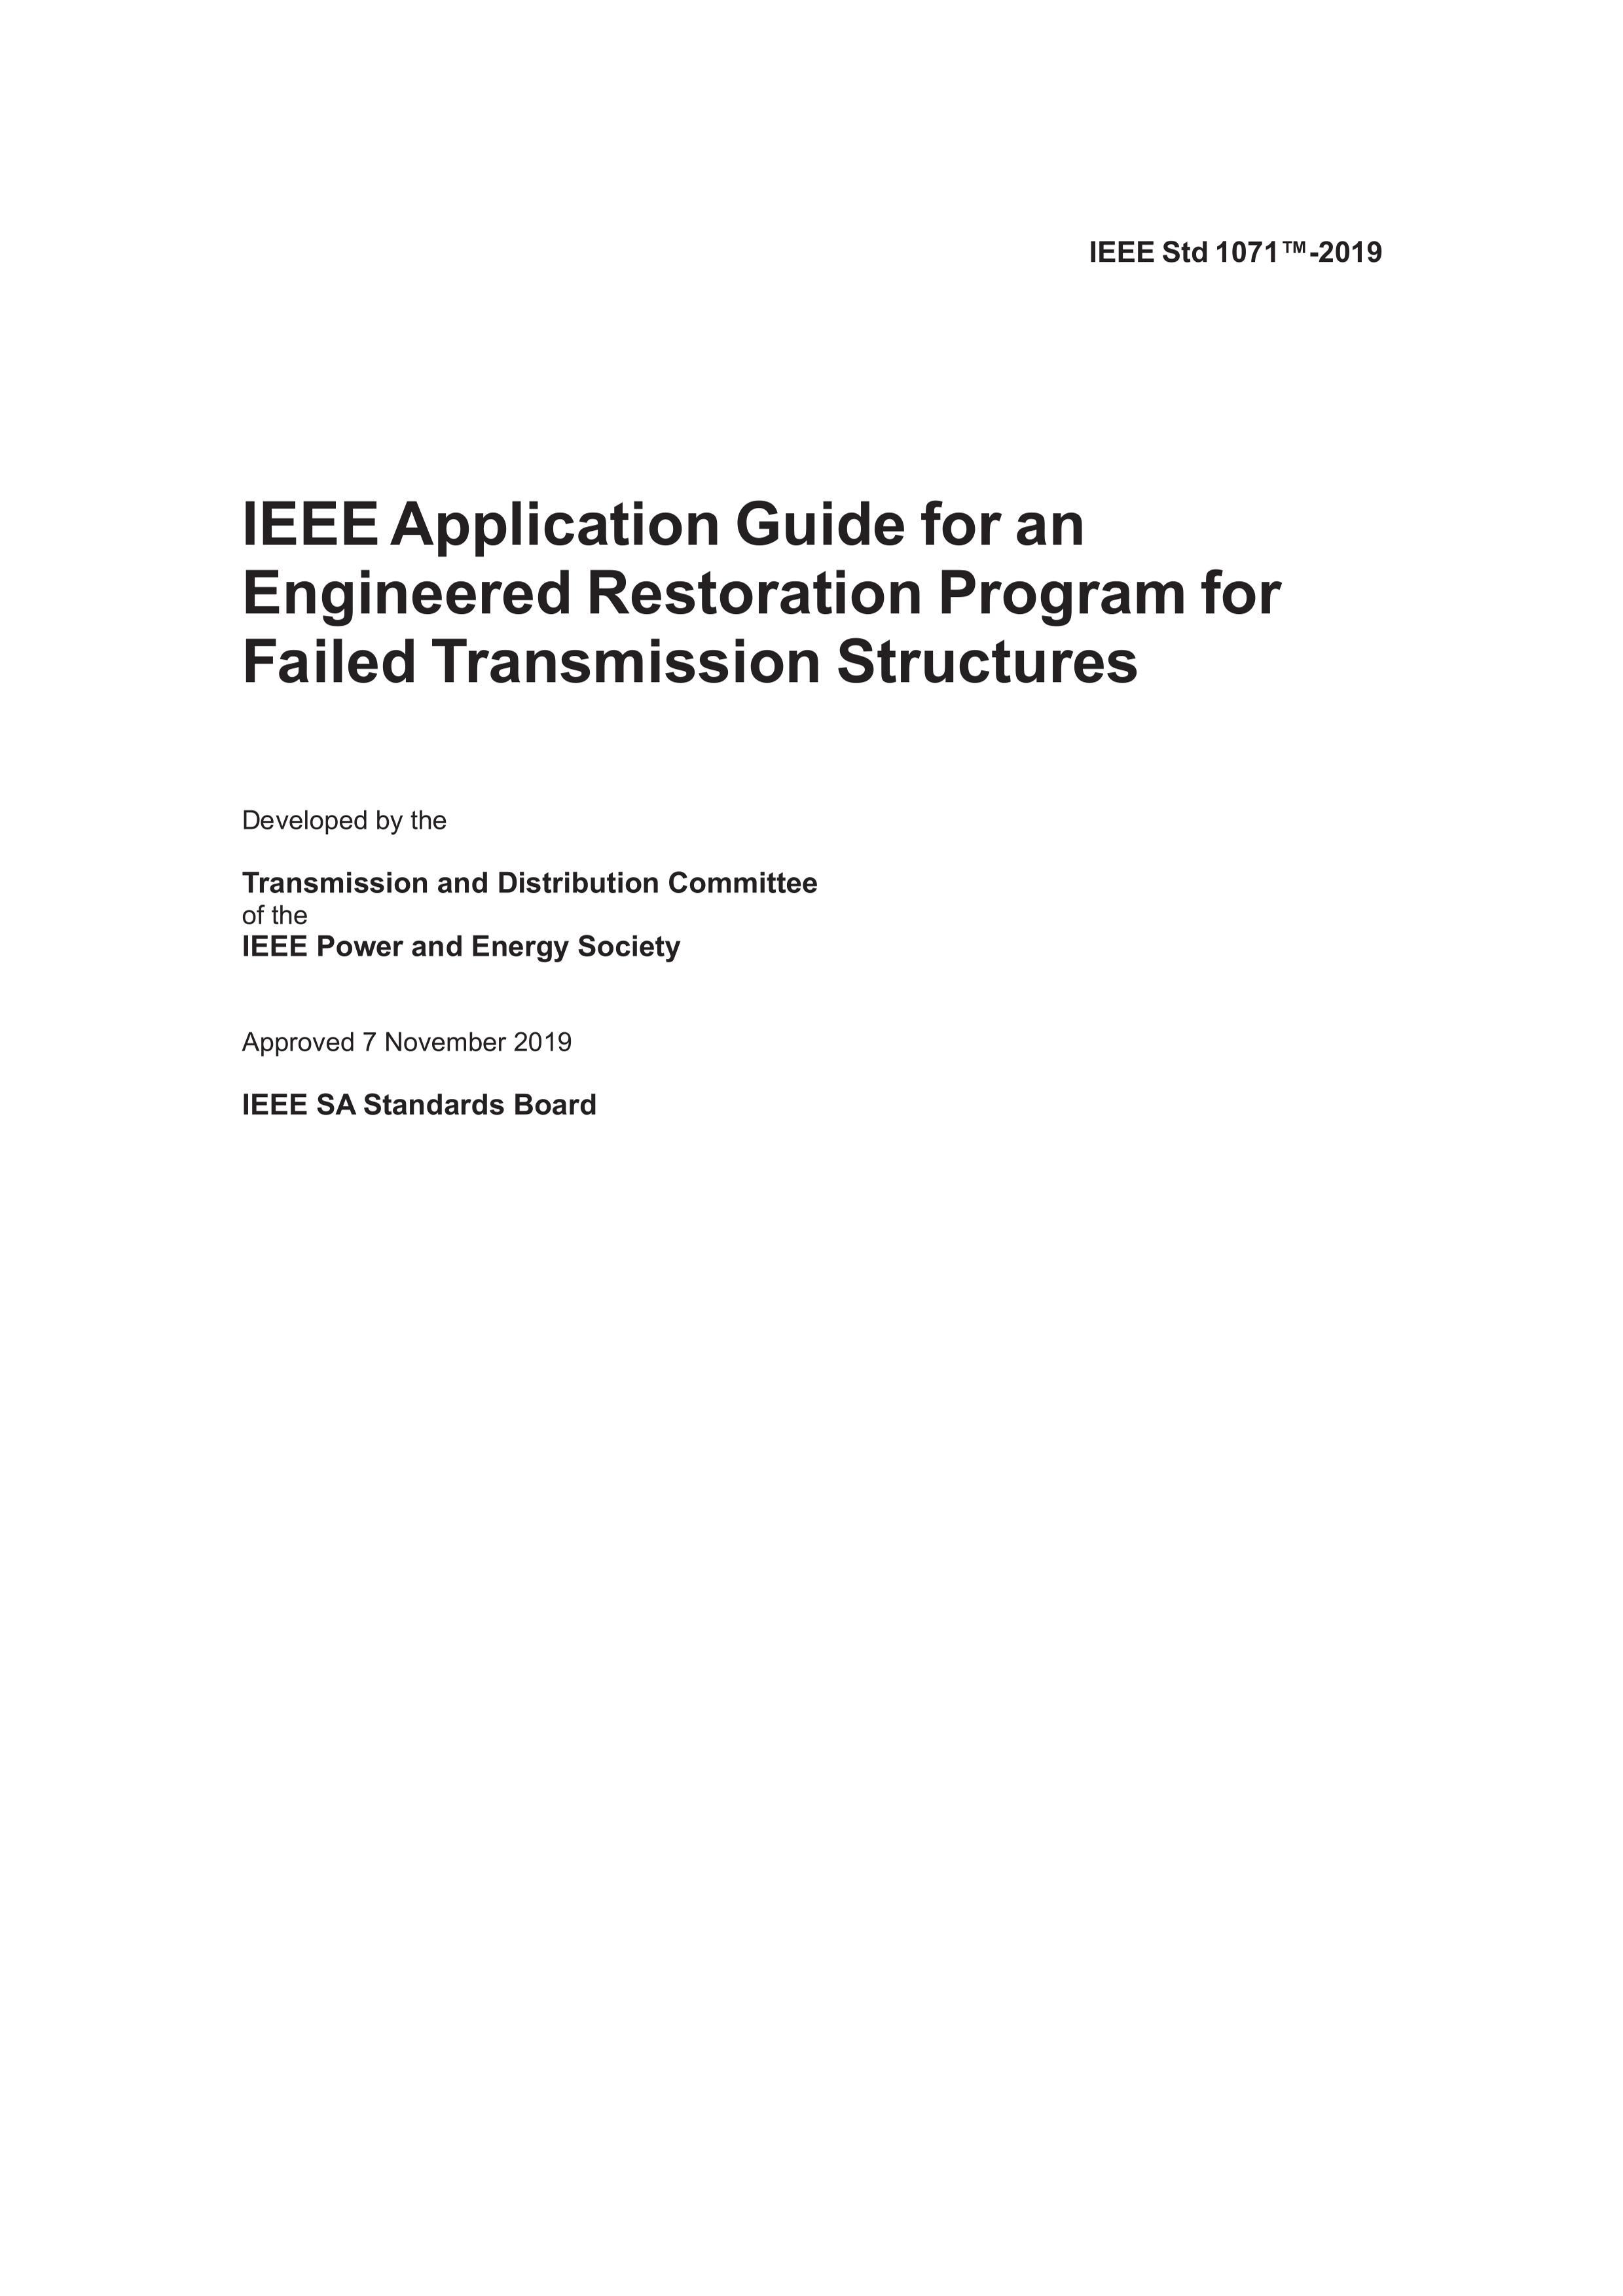 IEEE Std 1071-2019 IEEE Application Guide for an Engineered Restoration Program for Failed Transmission Structures.pdf2ҳ